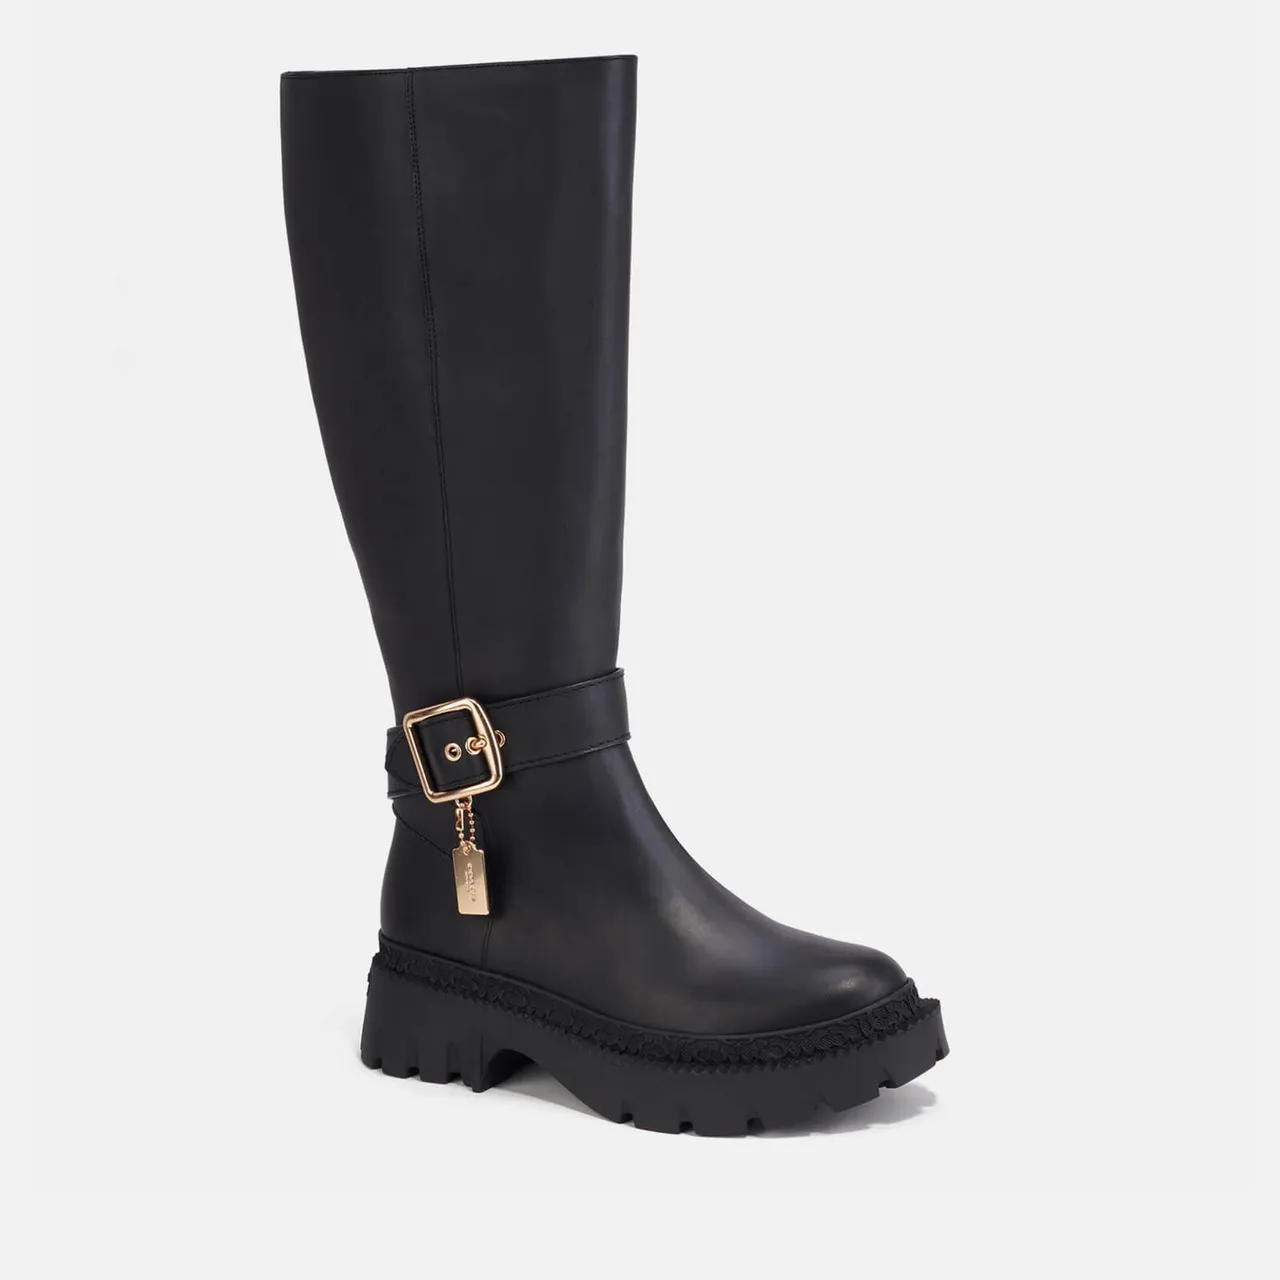 Coach James Leather Knee-High Boots - UK